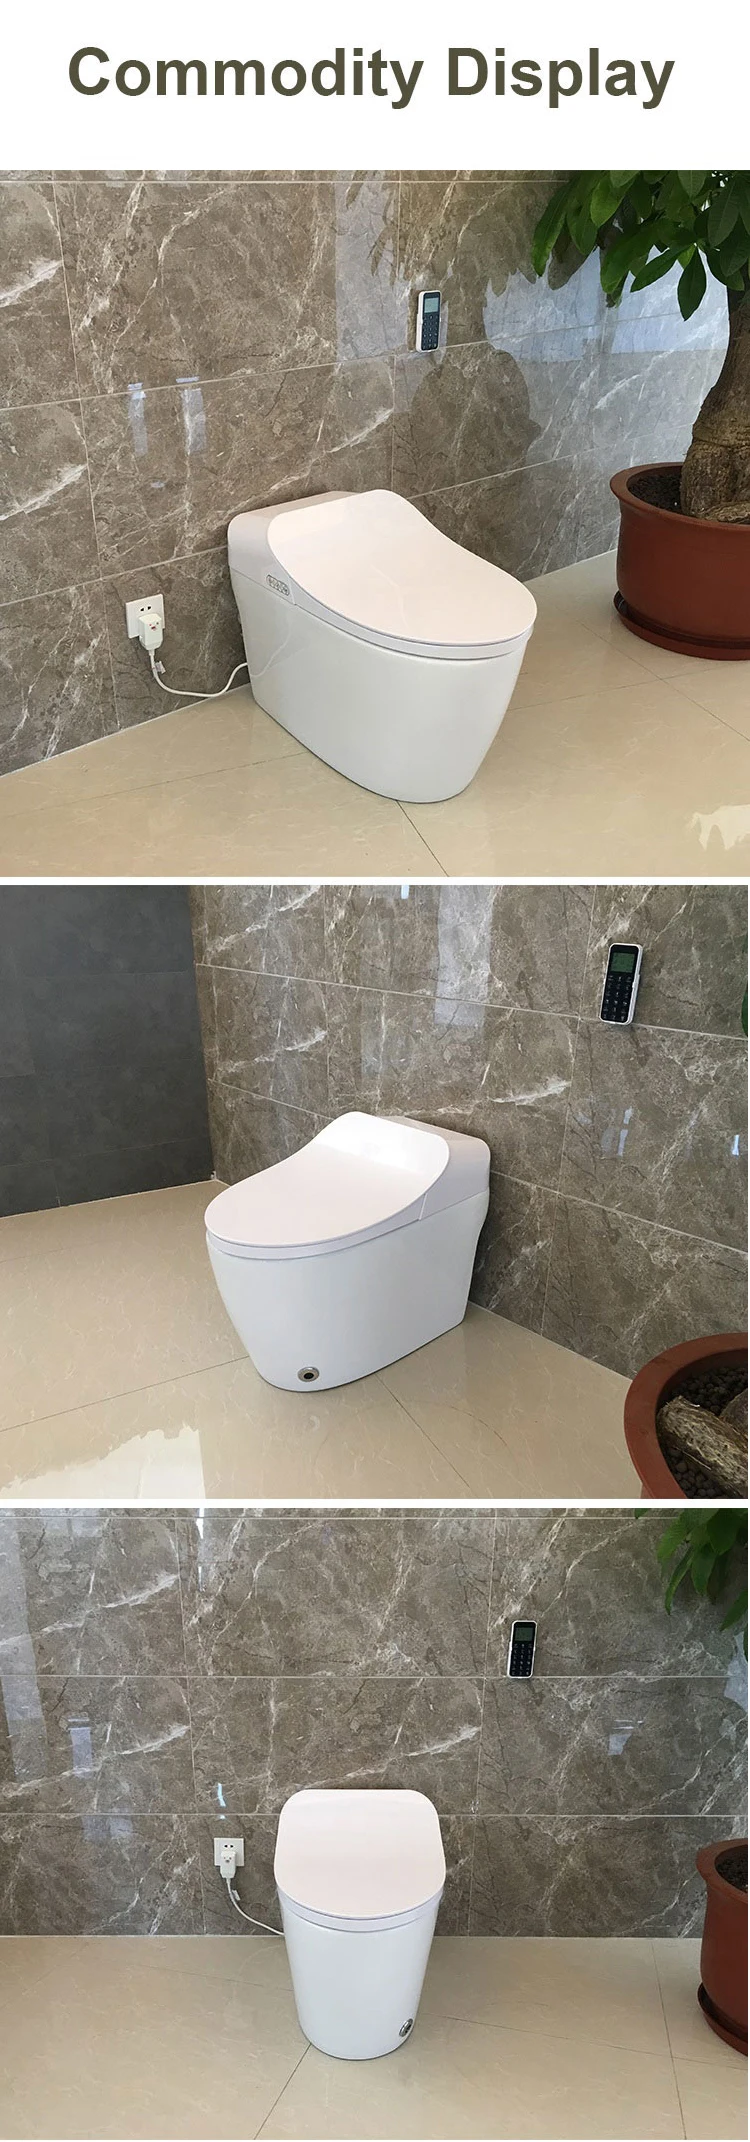 Hot sell modern bathroom intelligent smart toilets with heated seat cover